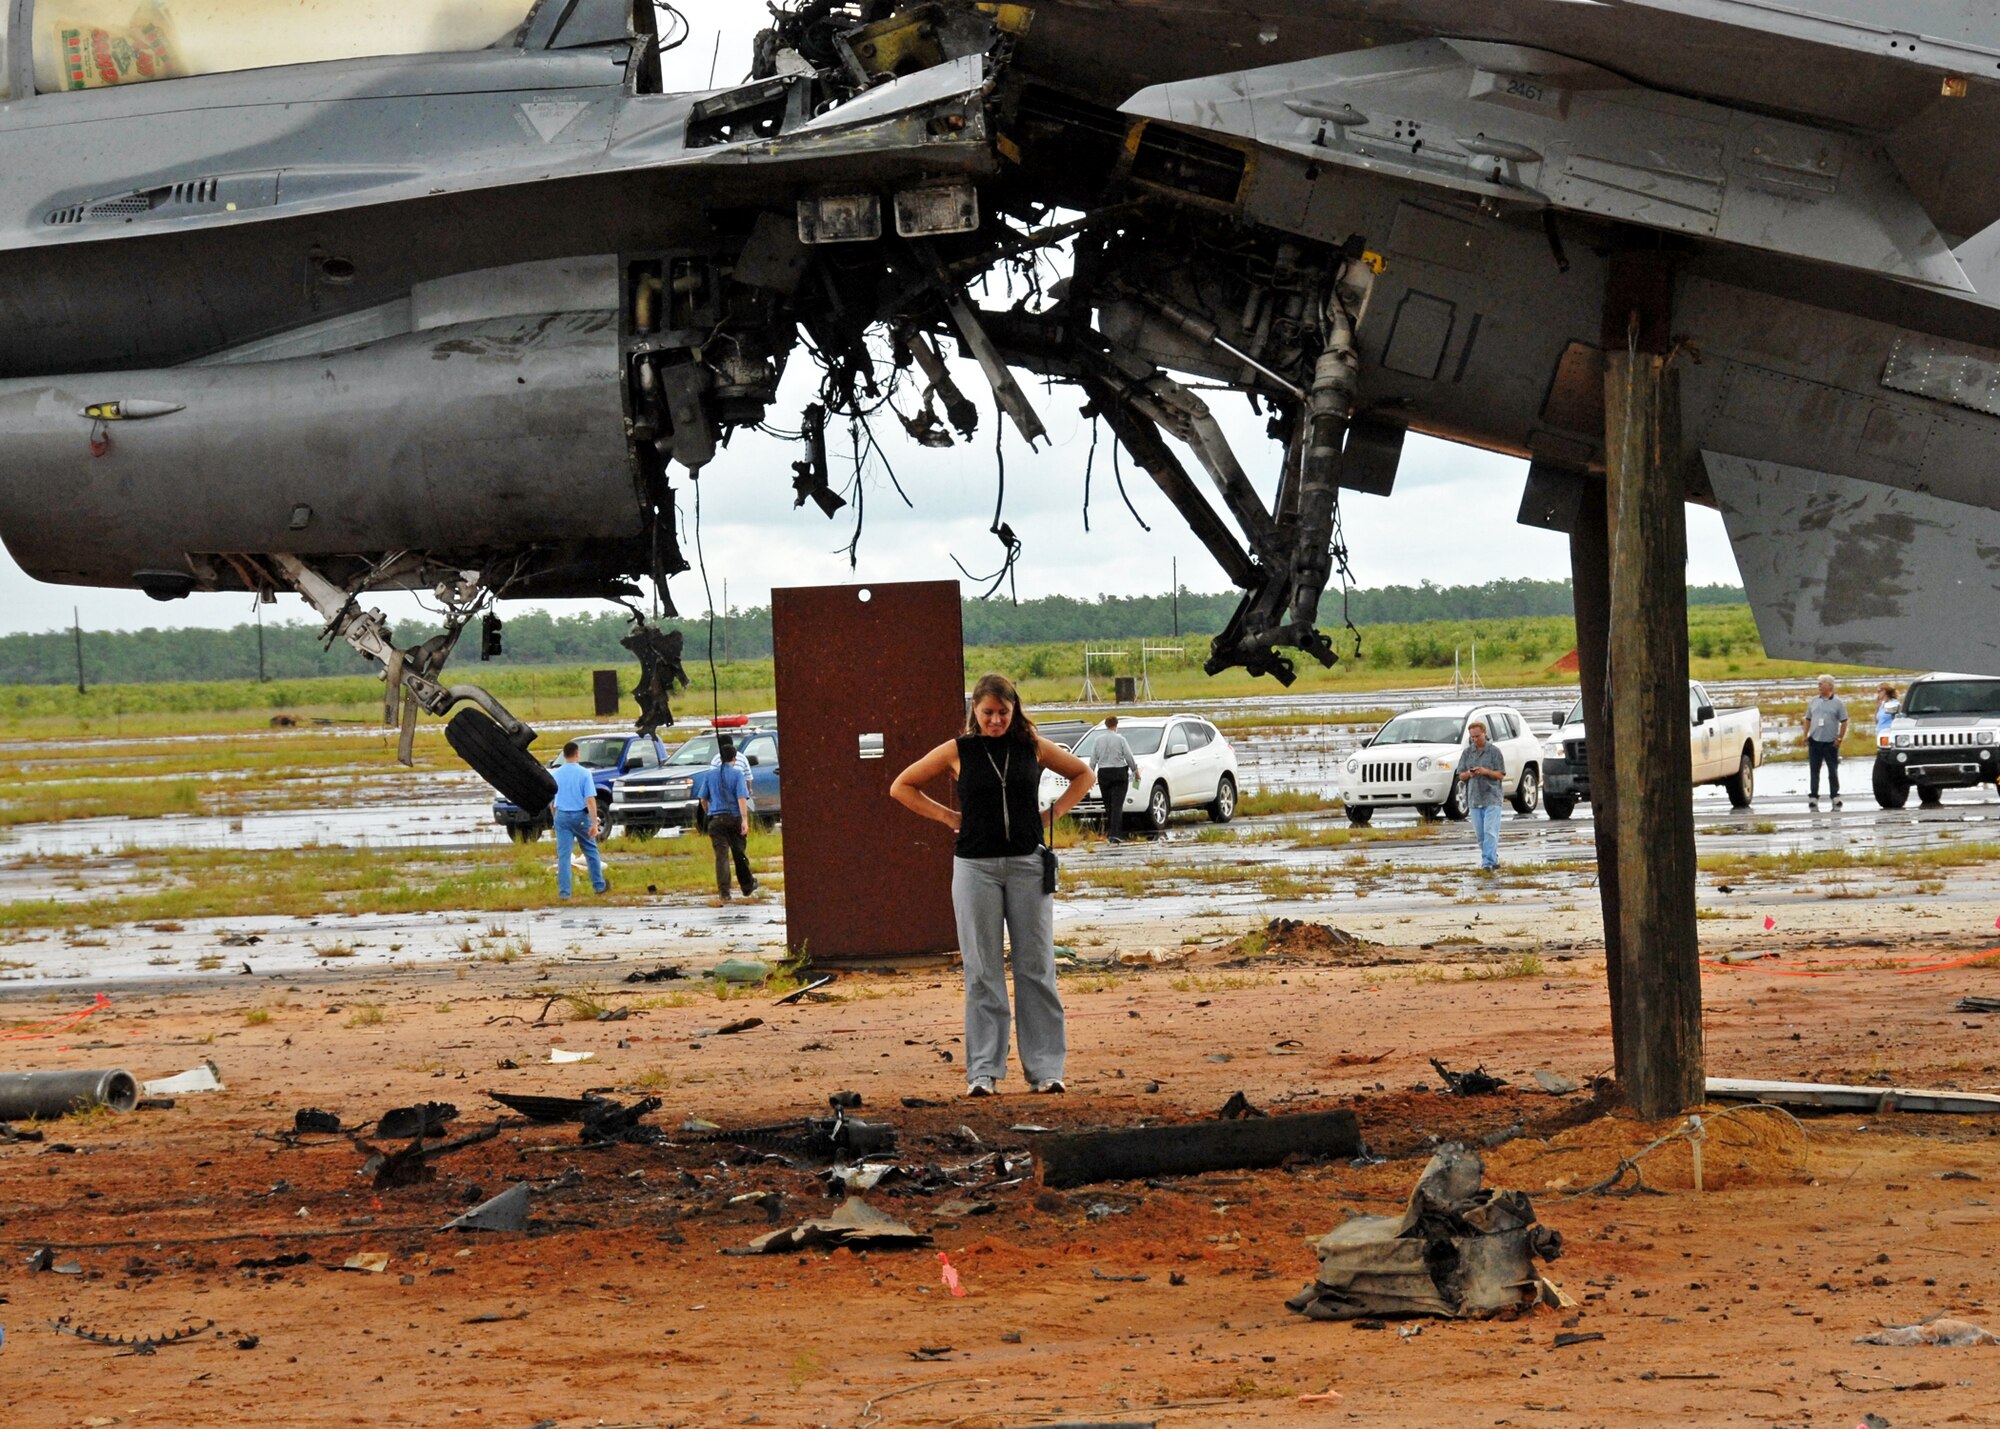 Beth Bartlett, test engineer for the flight termination system test, surveys the damage after the explosion  of an F-16 Fighting Falcon Aug. 19 at the Eglin Air Force Base range.   The explosion was a test of the FTS to be used in the QF-16.  The purpose was to demonstrate that the FTS design will be sufficient to immediately terminate the flight of a QF-16, as well as to determine a range safety debris footprint.  (U.S. Air Force photo/Samuel King Jr.)